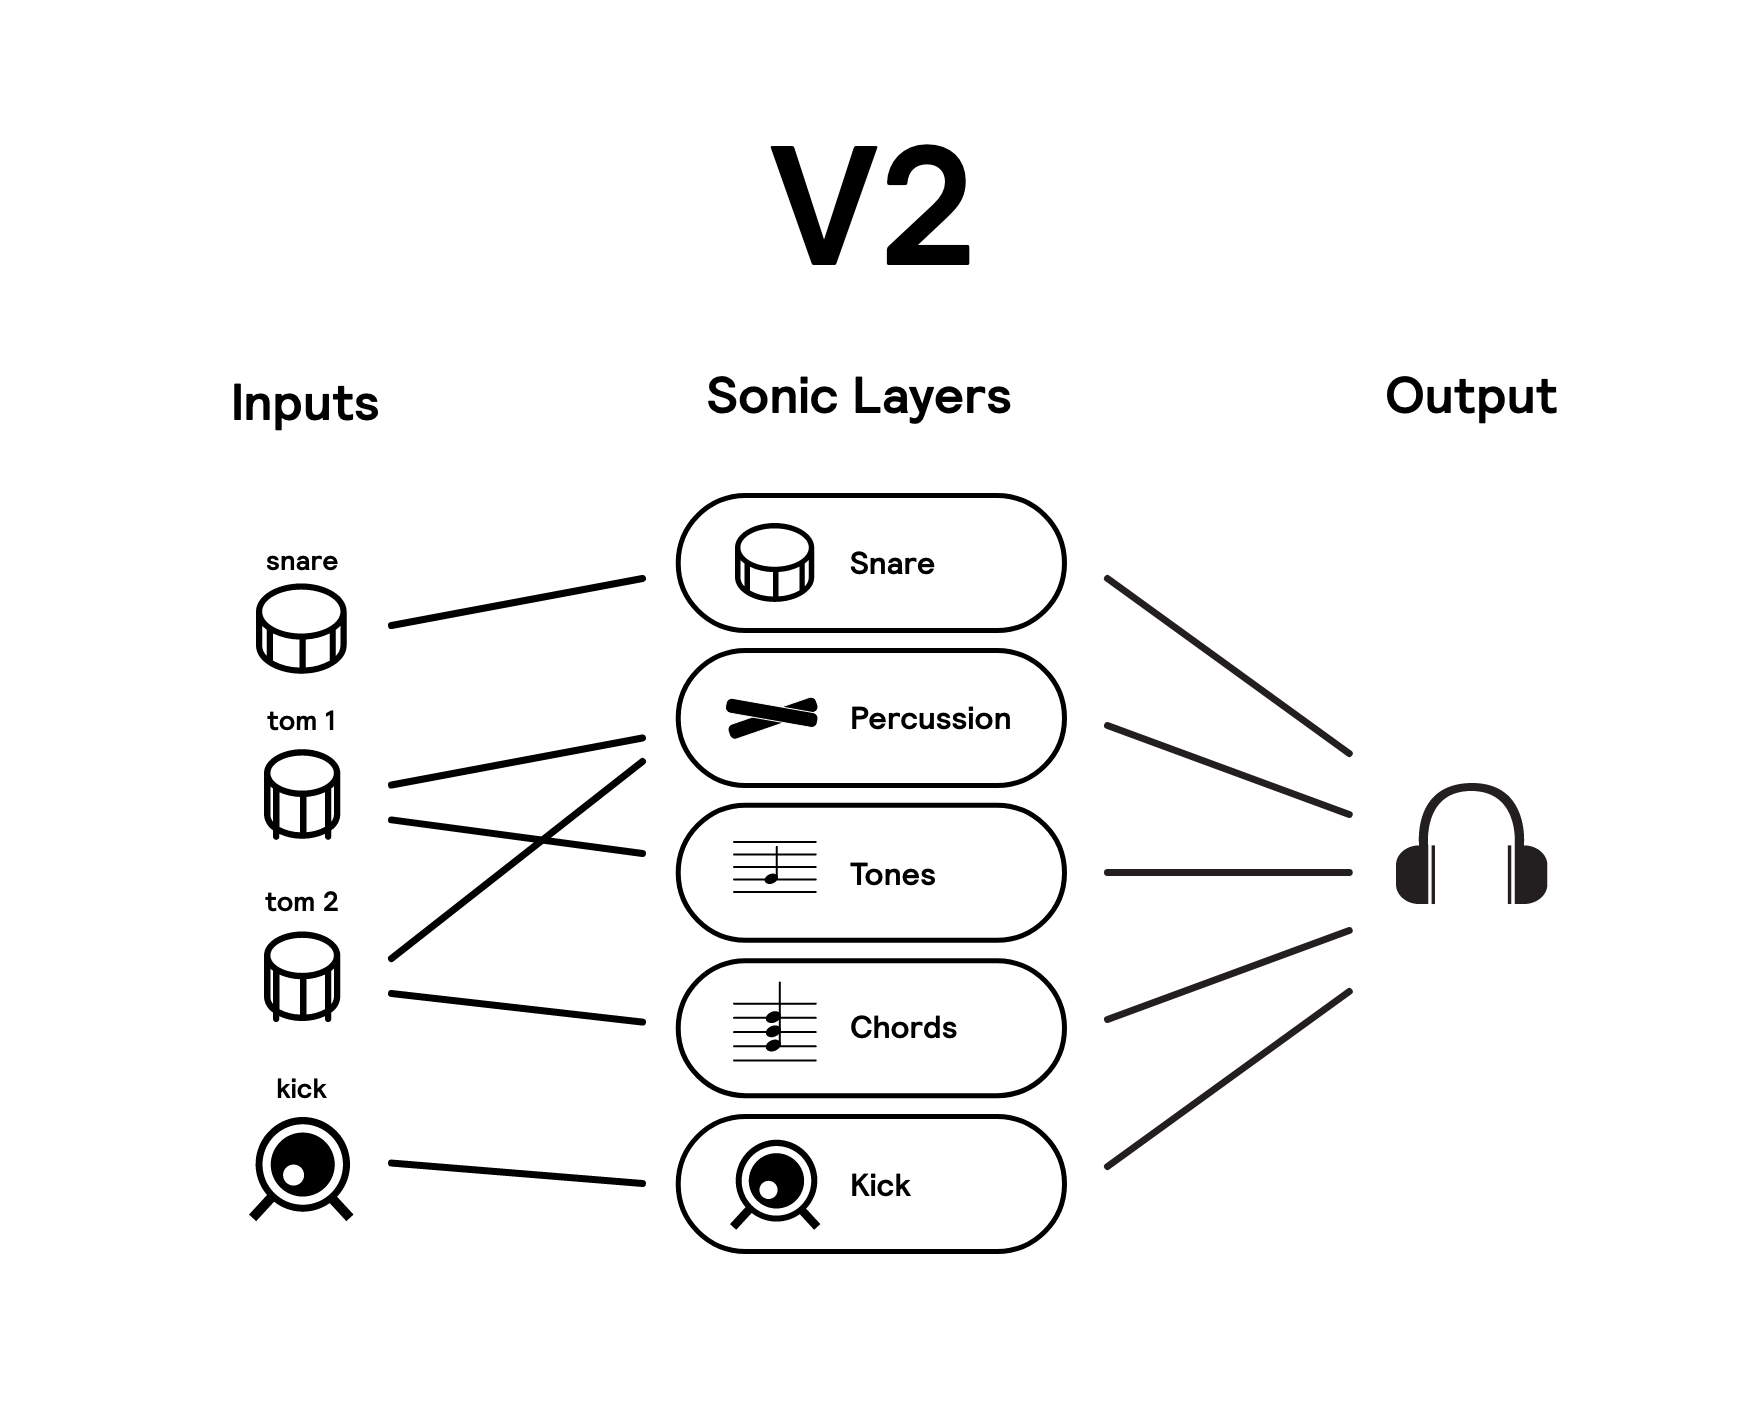 A diagram that shows how Sensory Percussion 2 sets are organized around sonic layers and can be controlled with inputs flexibly and routed to outputs flexibly